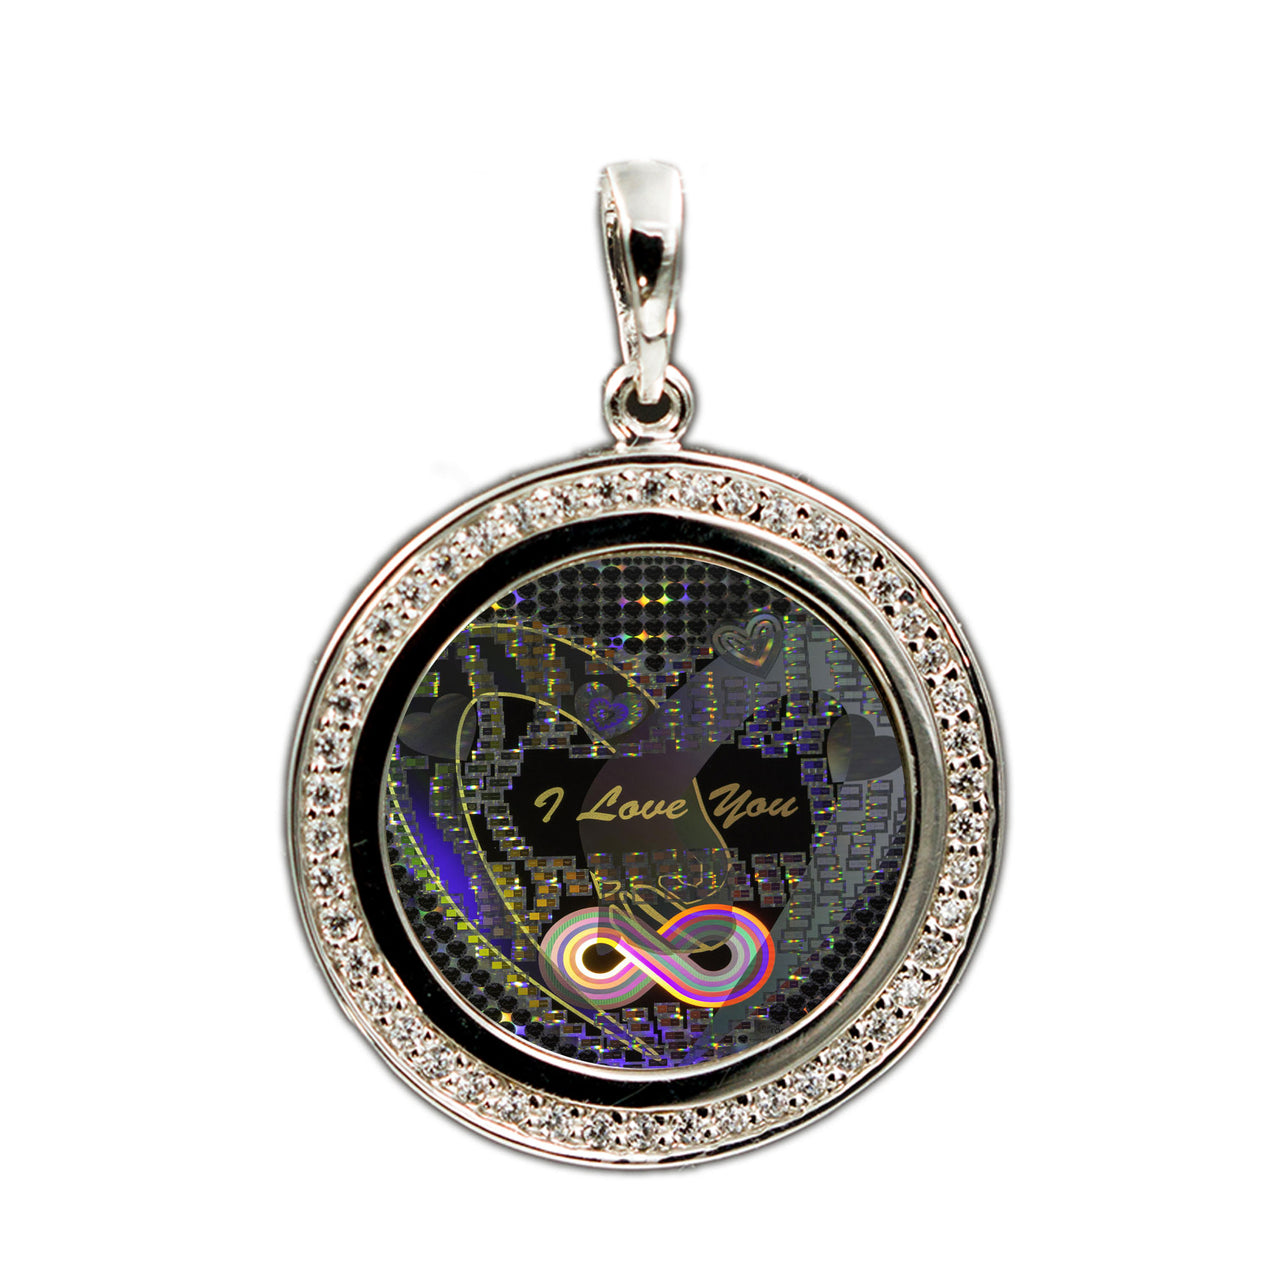 "I Love You" All Languages Pendant 5